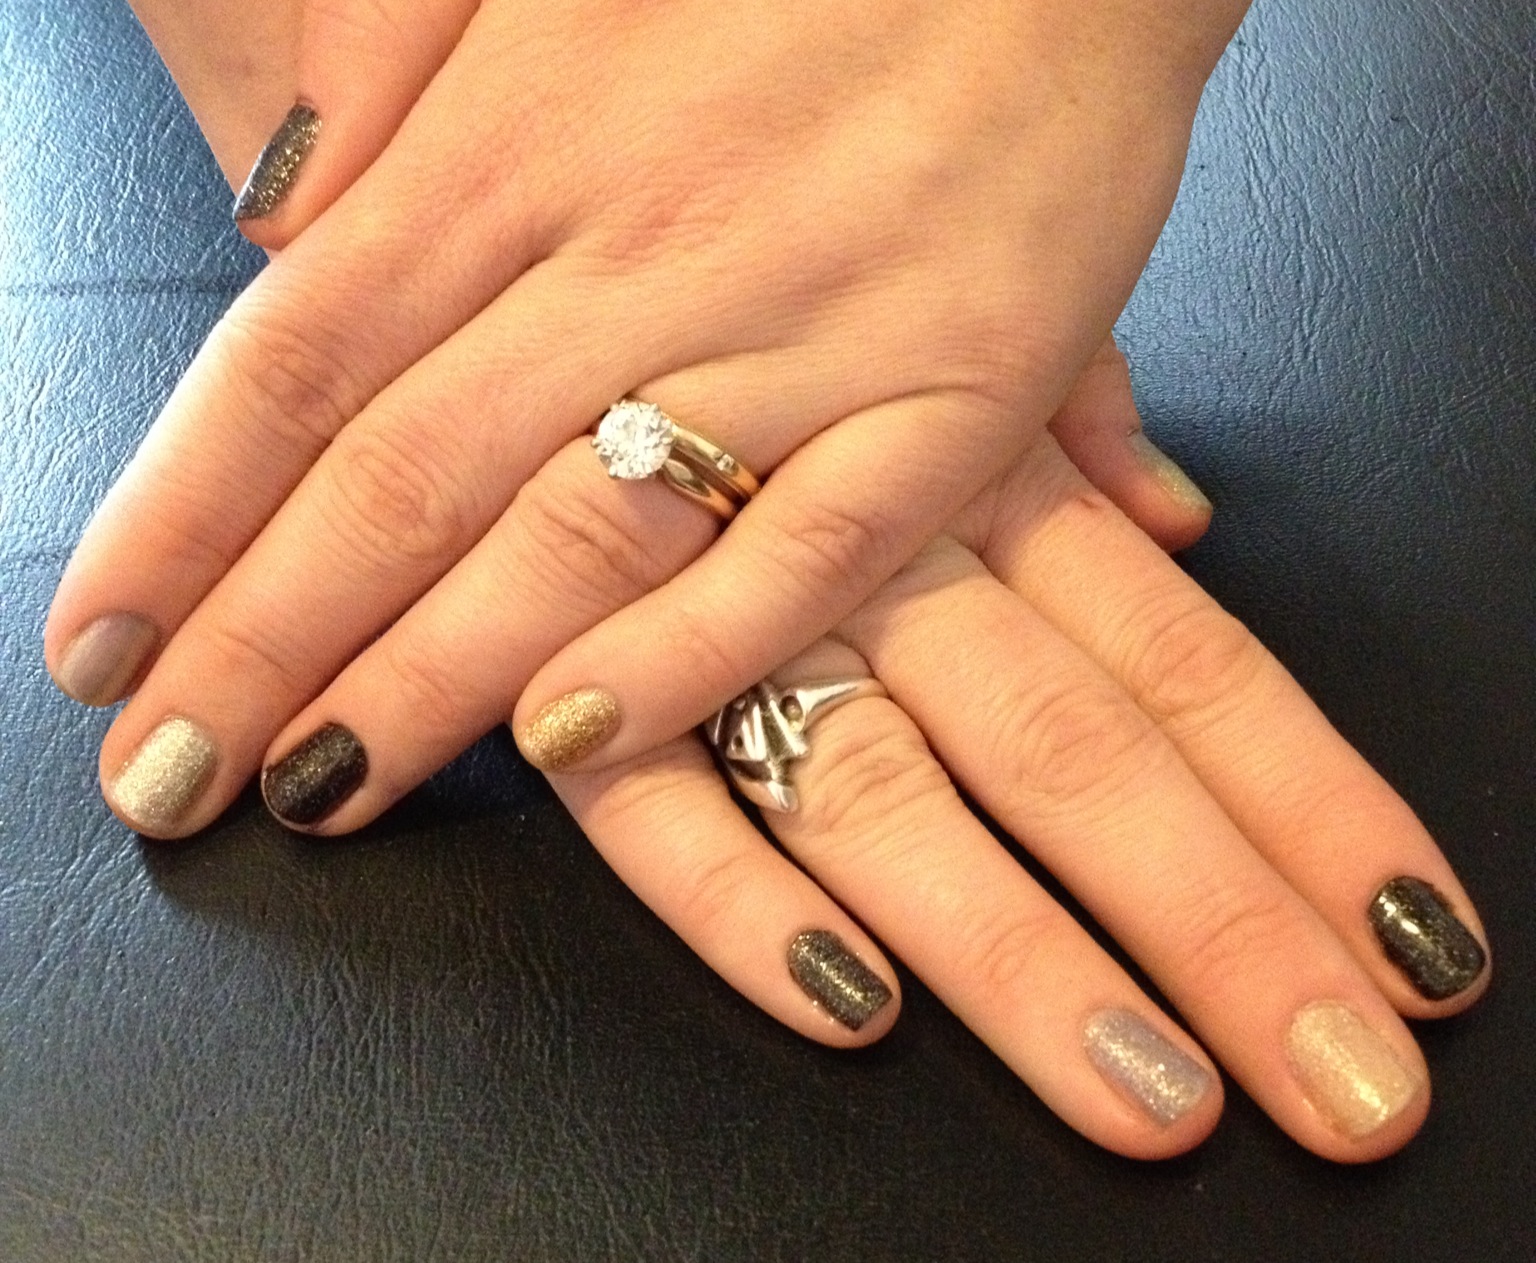 The Beauty of Life: Manicure Spotting: Katie Wearing a Multicolored ...